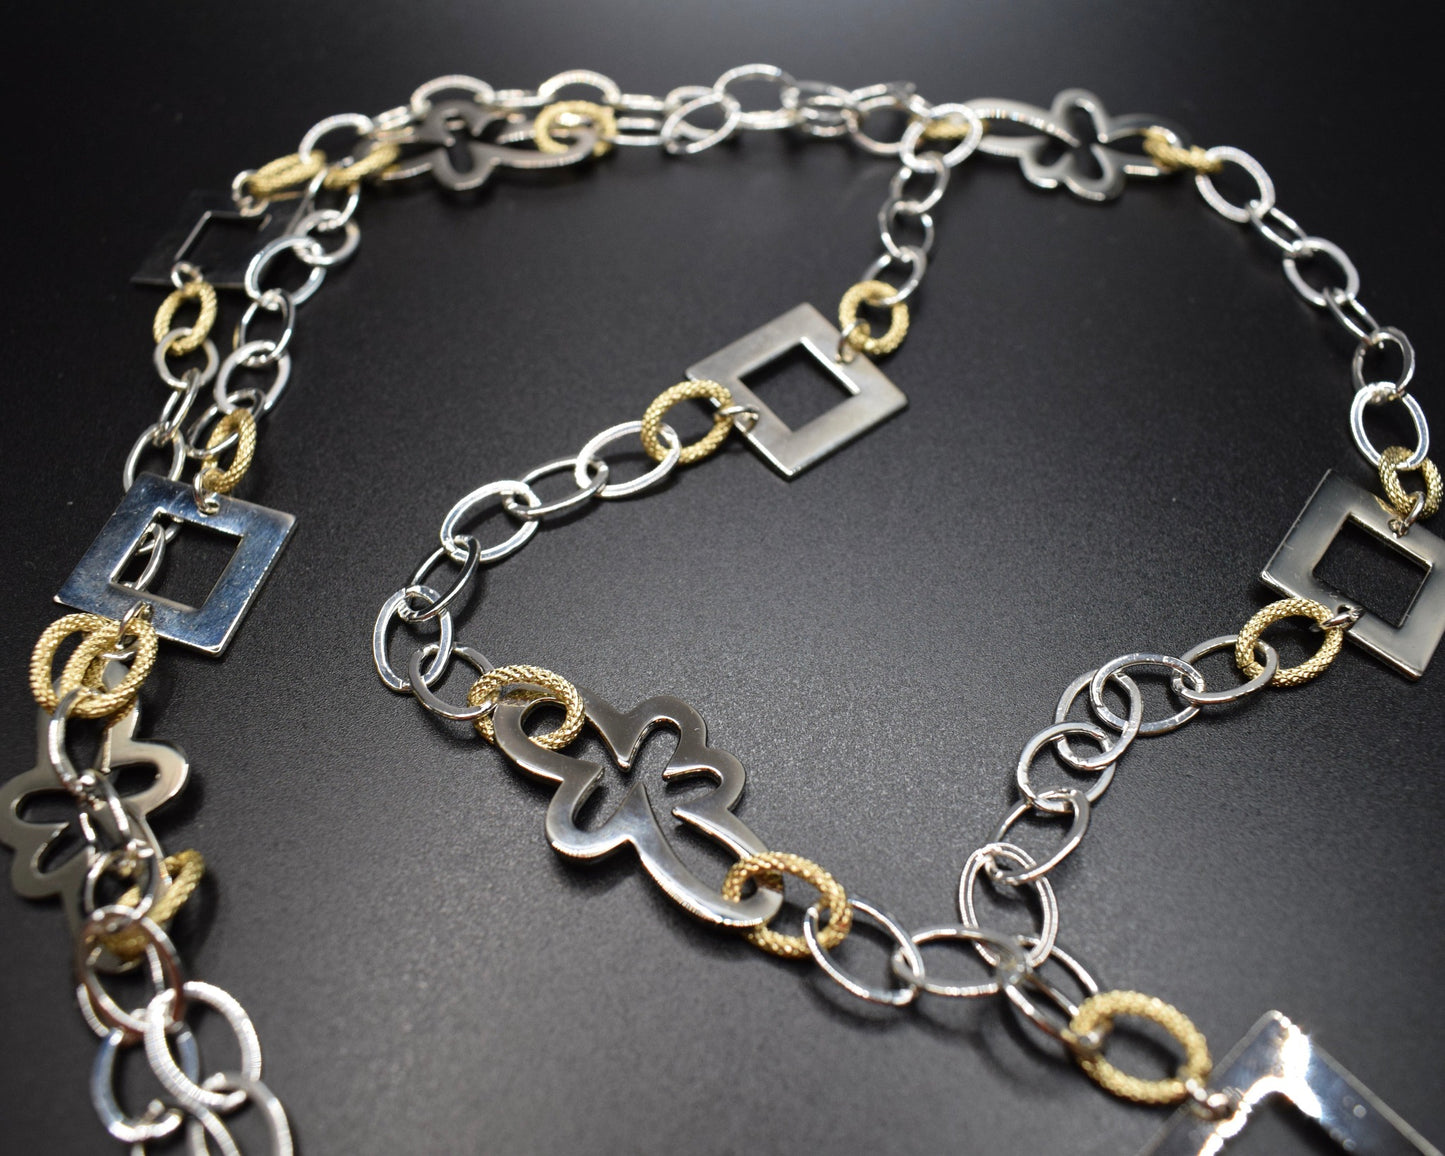 Necklace Much elegance necklace silver chain with gold details and polished labradorite stone